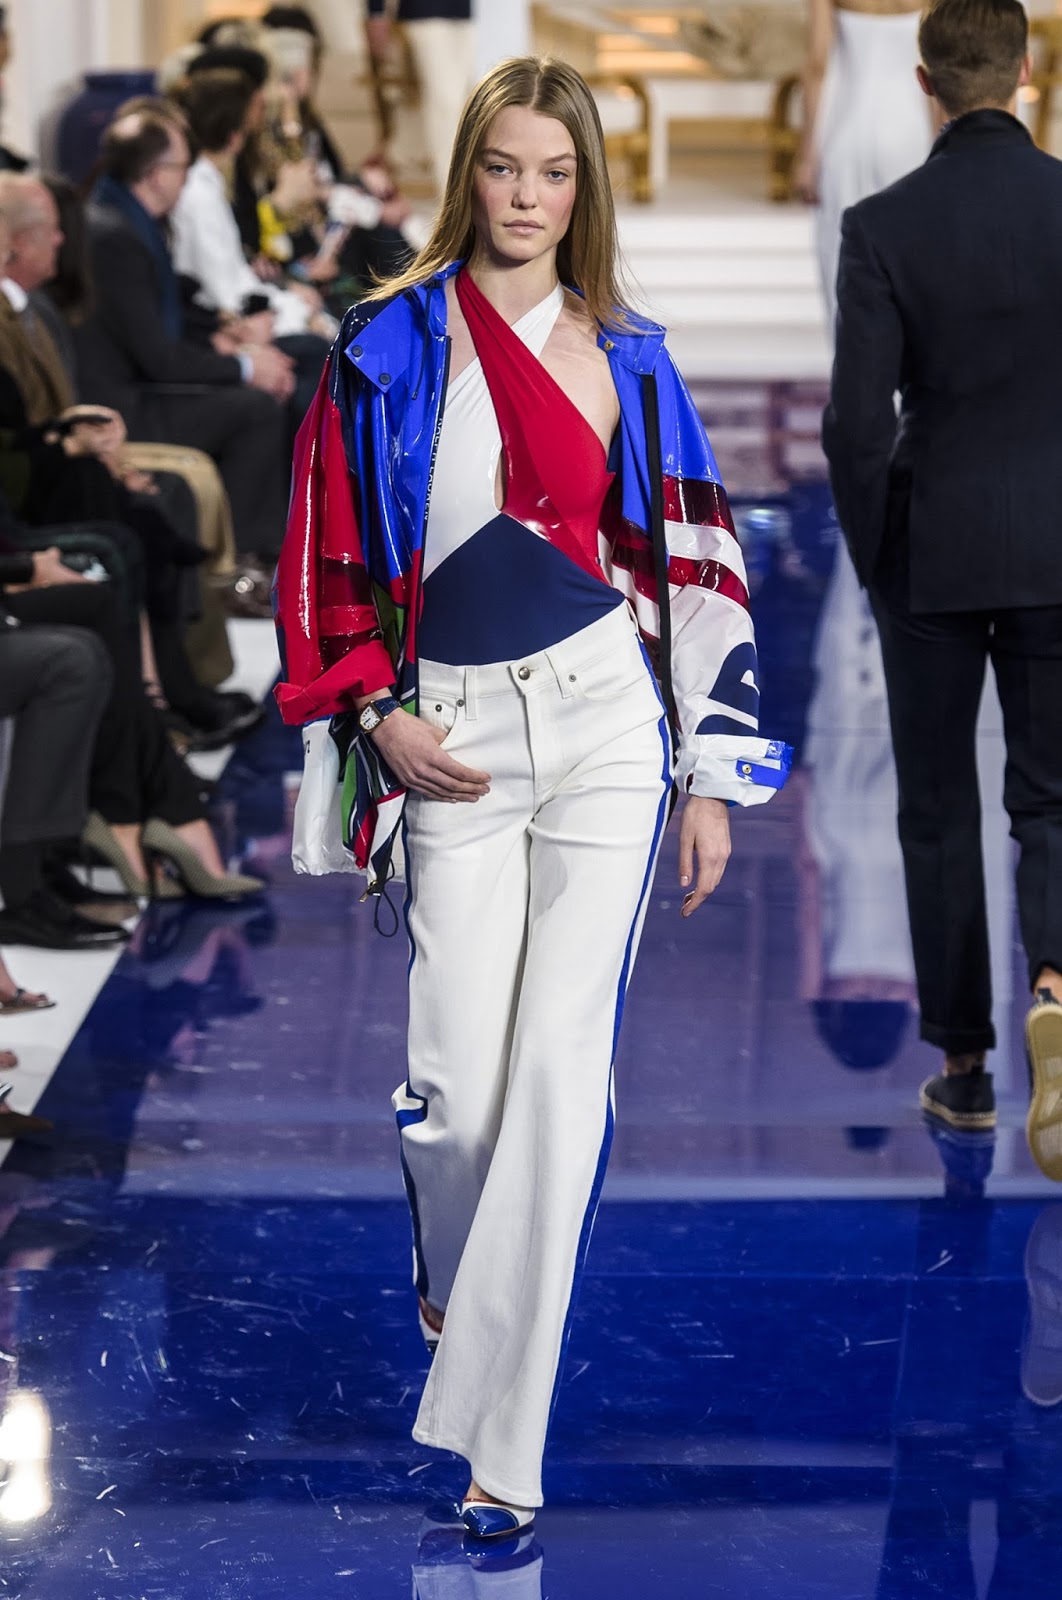 RALPH LAUREN ON THE RUNWAY May 4, 2018 | ZsaZsa Bellagio - Like No Other